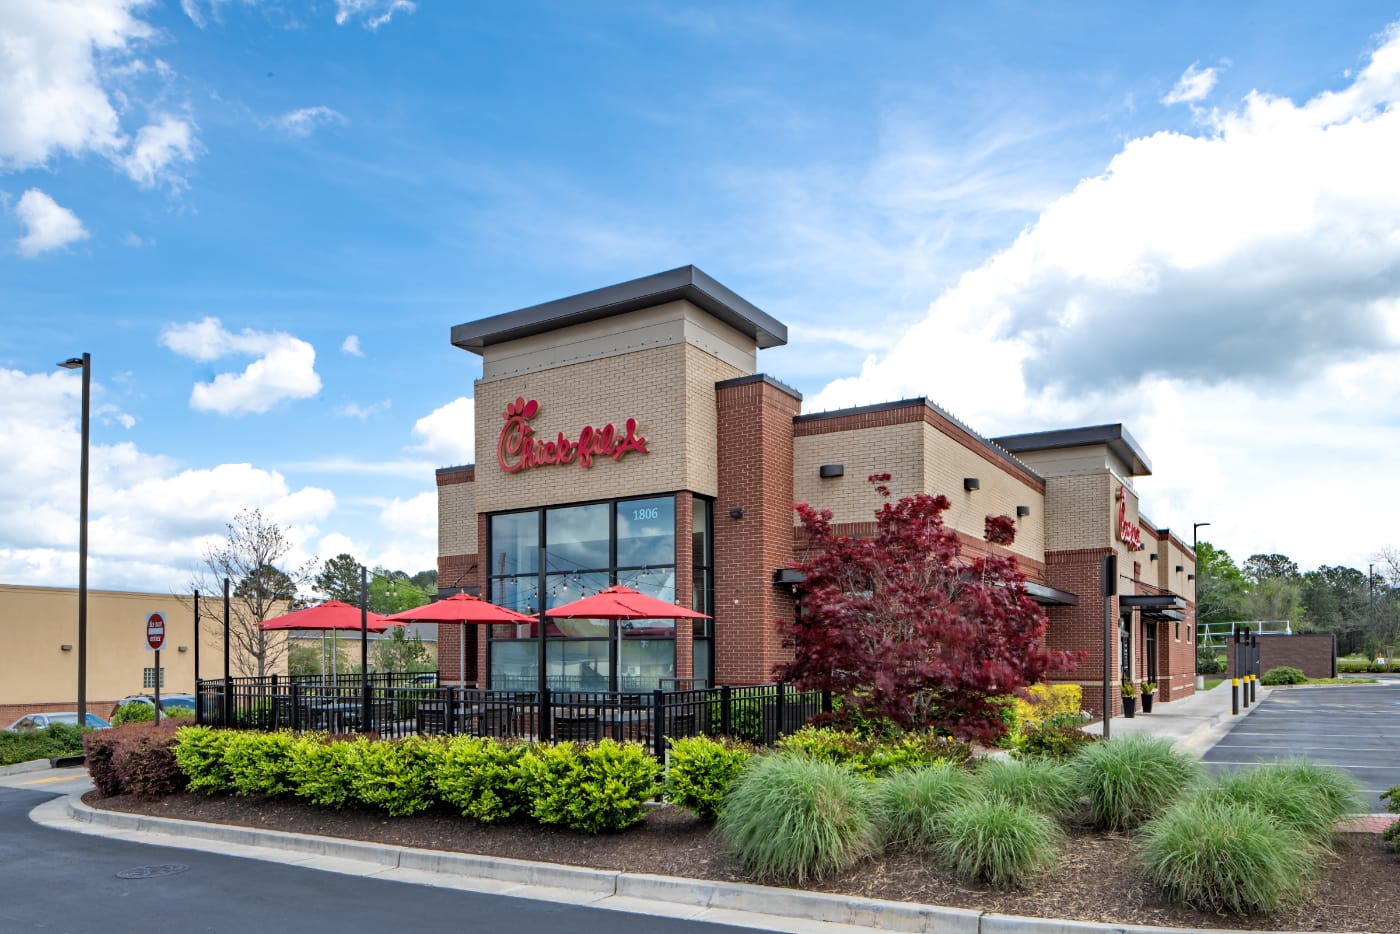 Exterior of Chick-fil-A restaurant with three tables with red umbrellas.